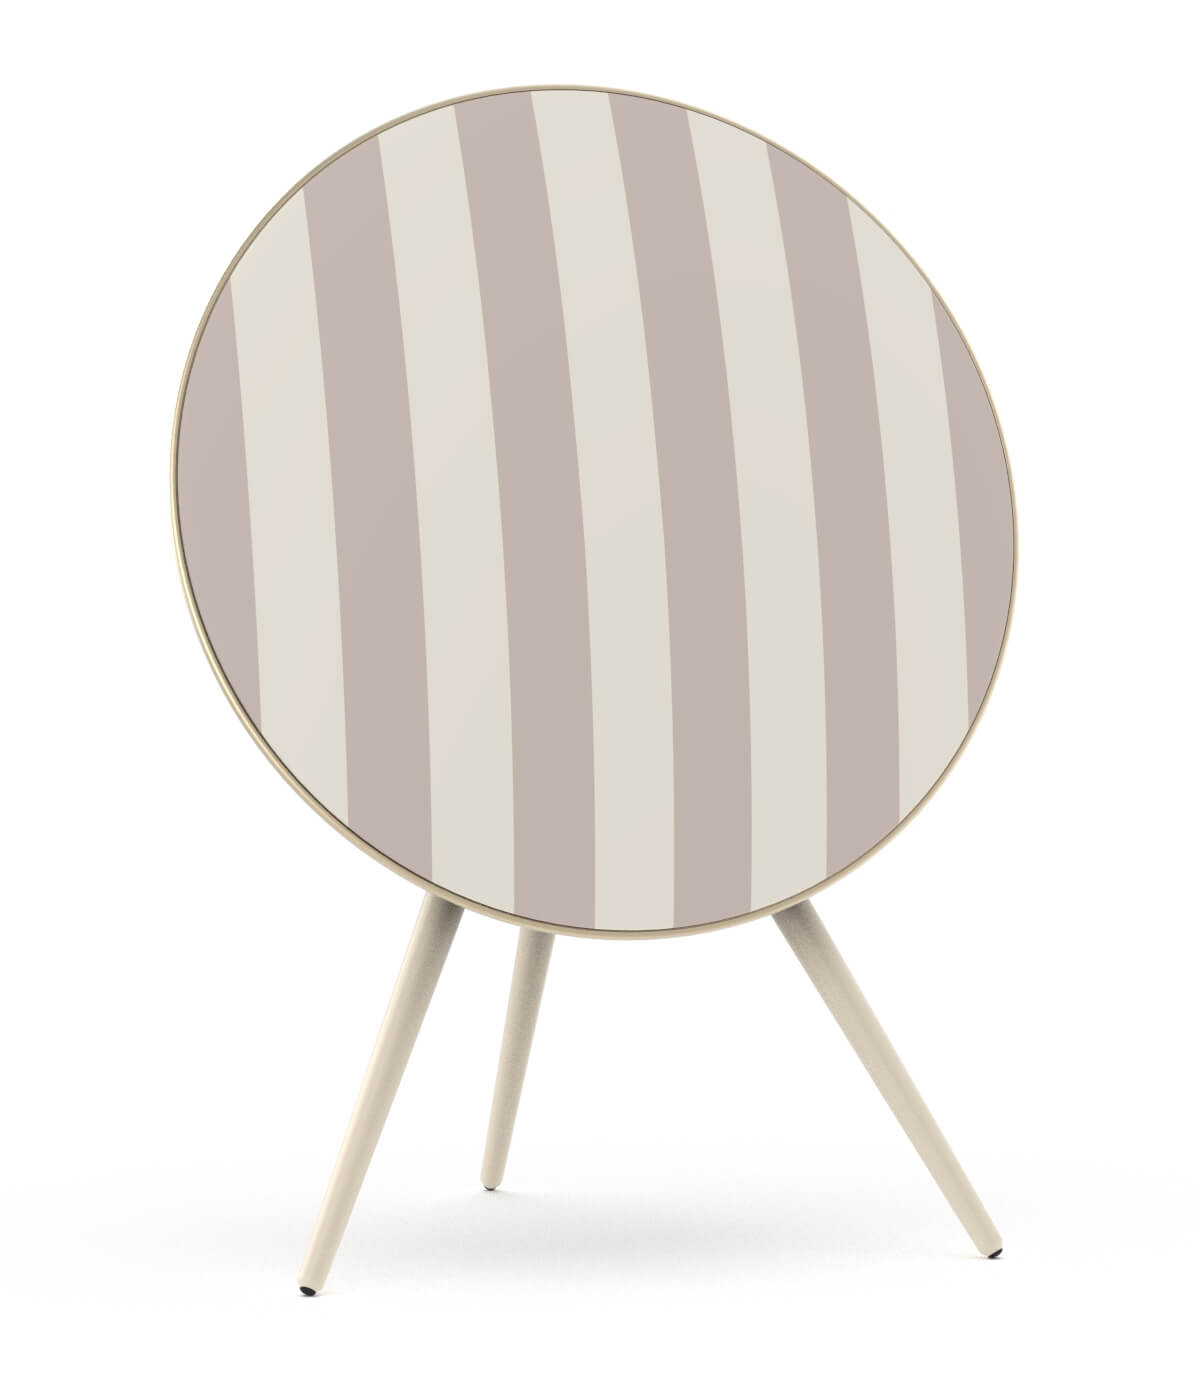 Skiniplay cover Nougat for Bang & Olufsen Beoplay A9 and Beosound A9 speaker